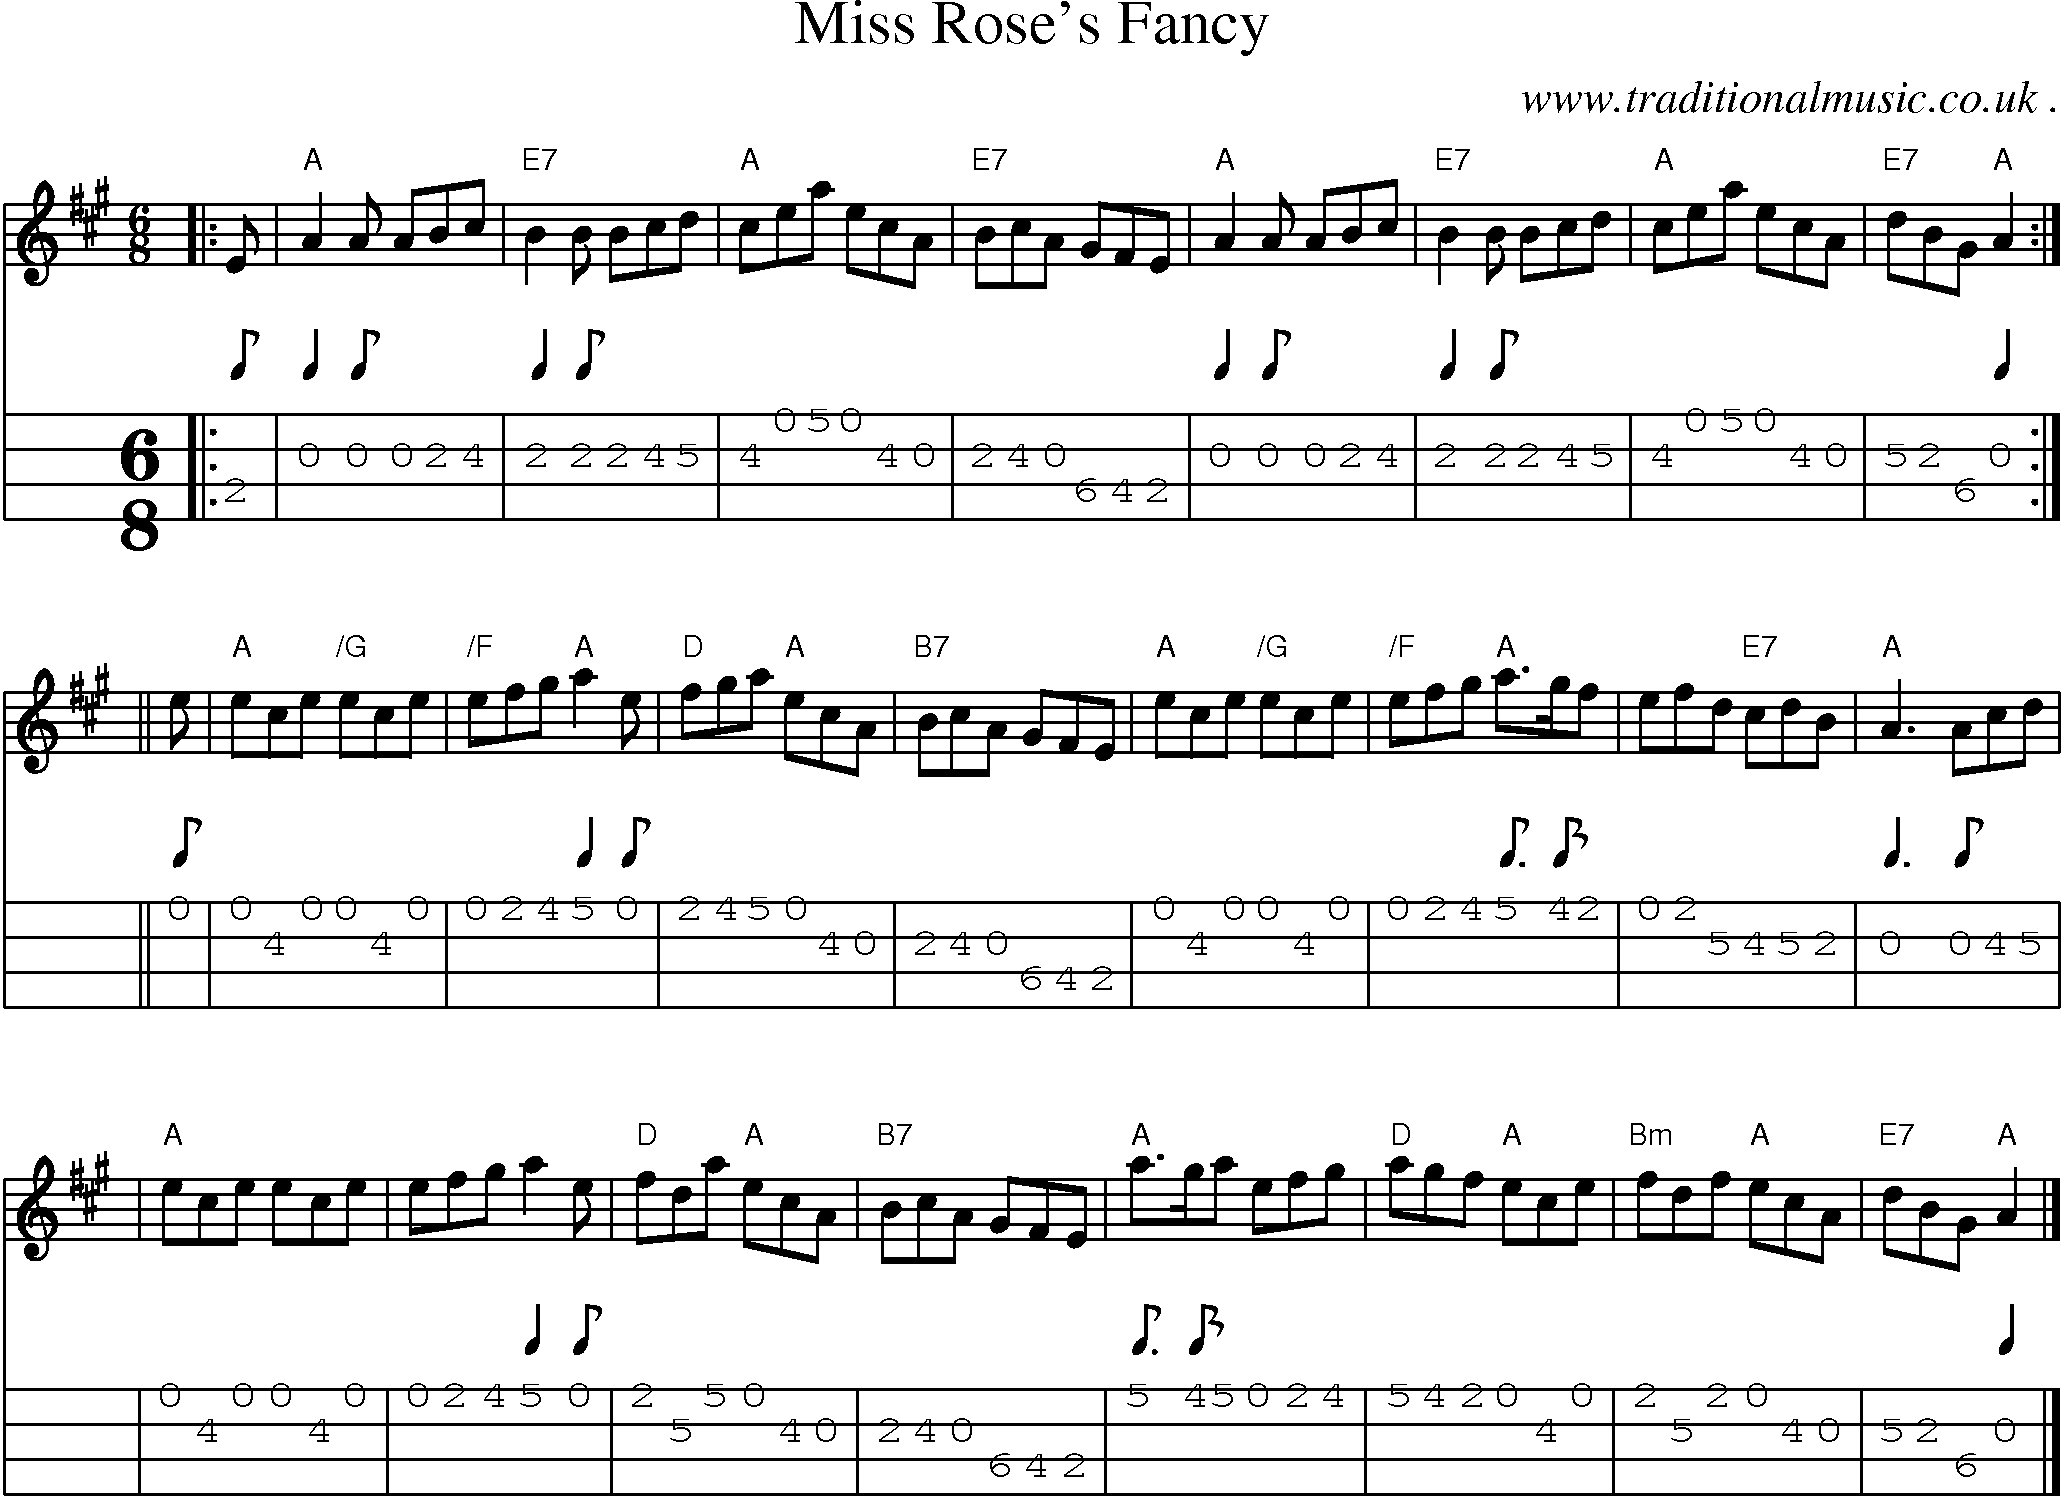 Sheet-music  score, Chords and Mandolin Tabs for Miss Roses Fancy